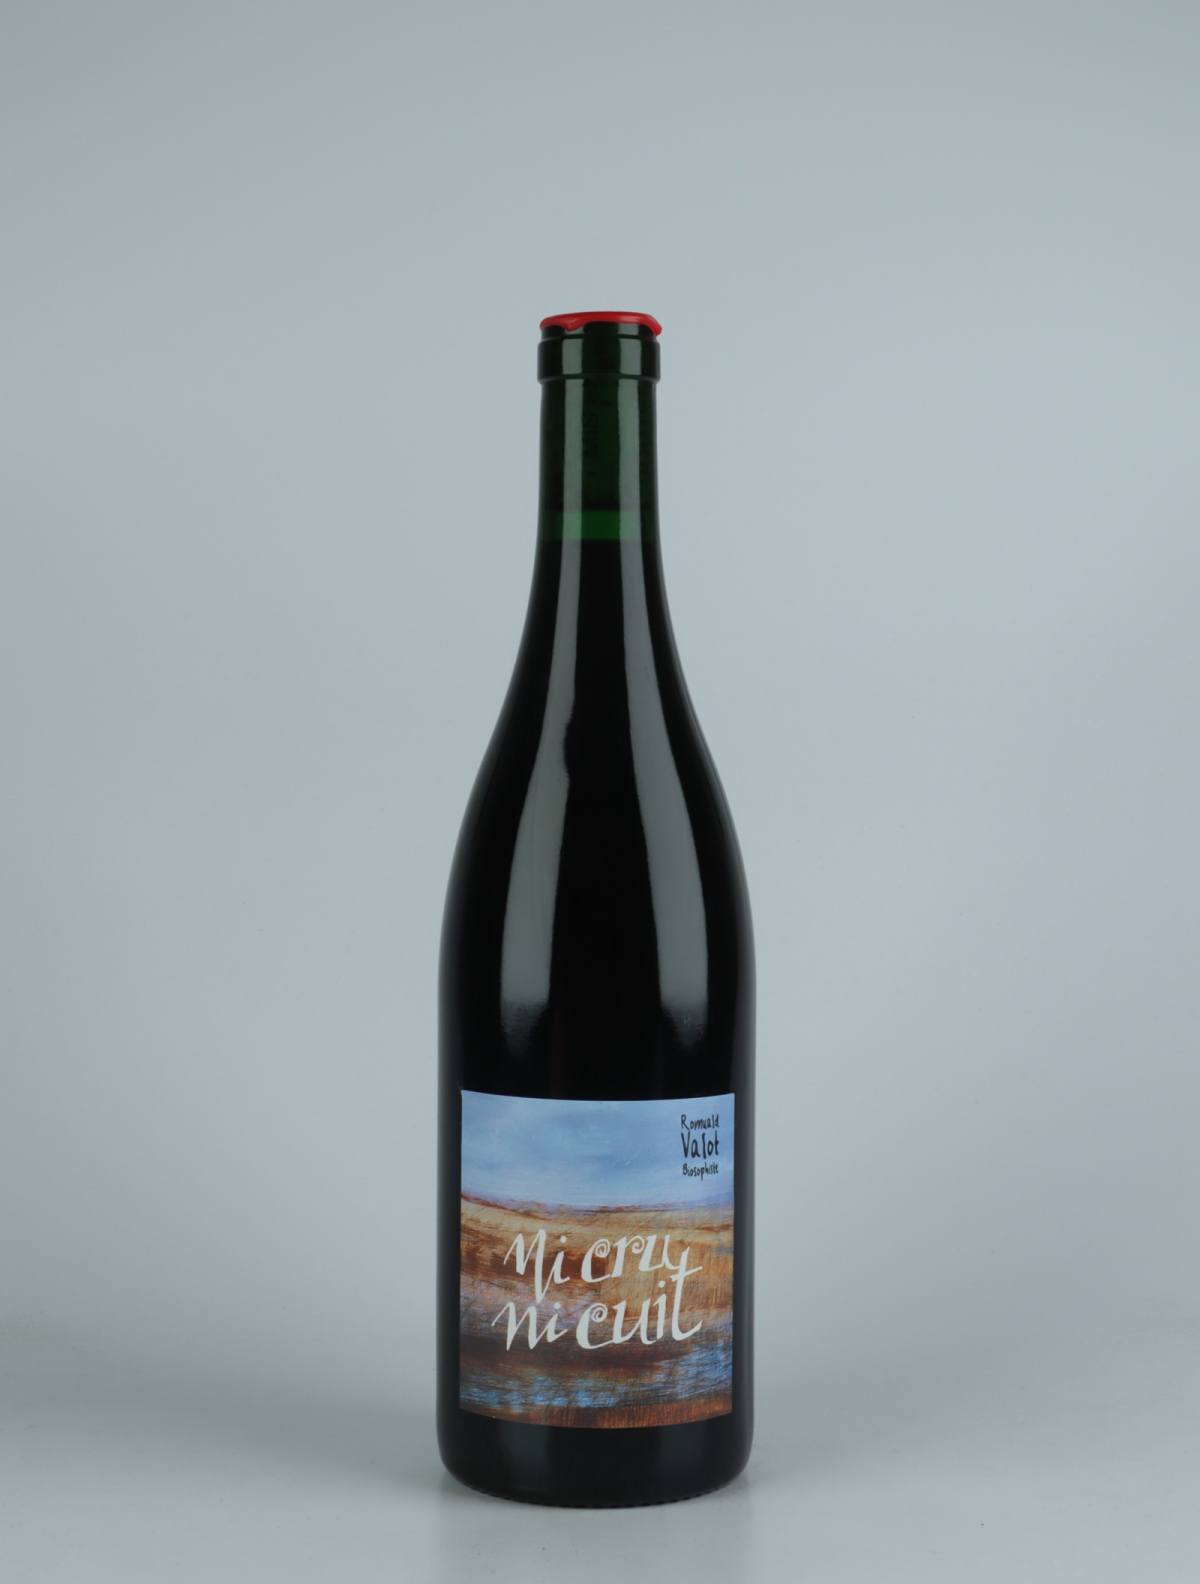 A bottle 2021 Ni Cru ni Cuit Red wine from Romuald Valot, Beaujolais in France